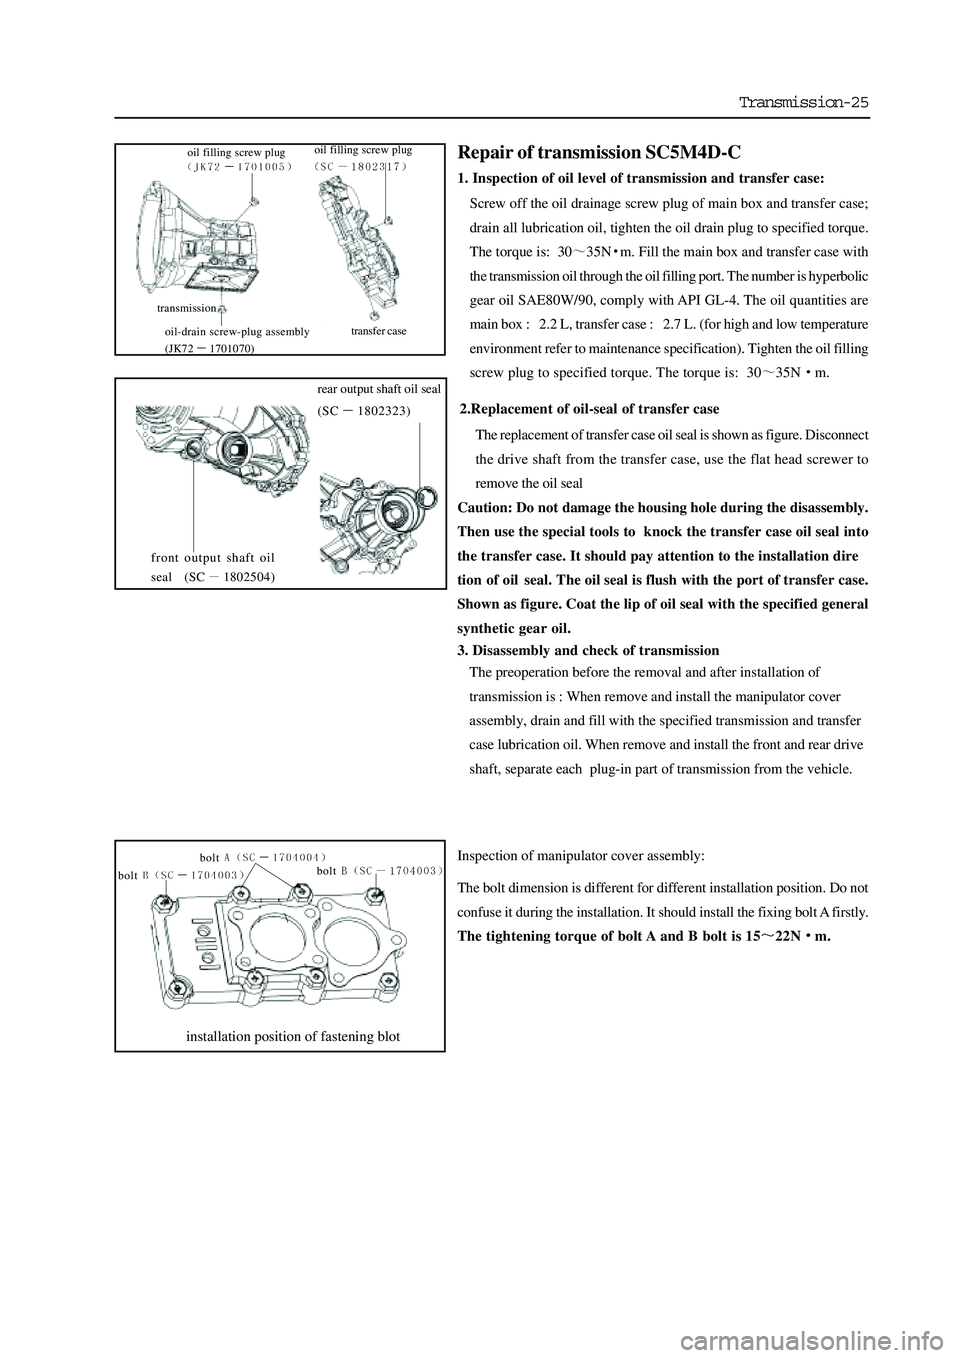 GREAT WALL HOVER 2006  Service Repair Manual Transmission-25
2.Replacement of oil-seal of transfer case
The replacement of transfer case oil seal is shown as figure. Disconnect
the drive shaft from the transfer case, use the flat head screwer to